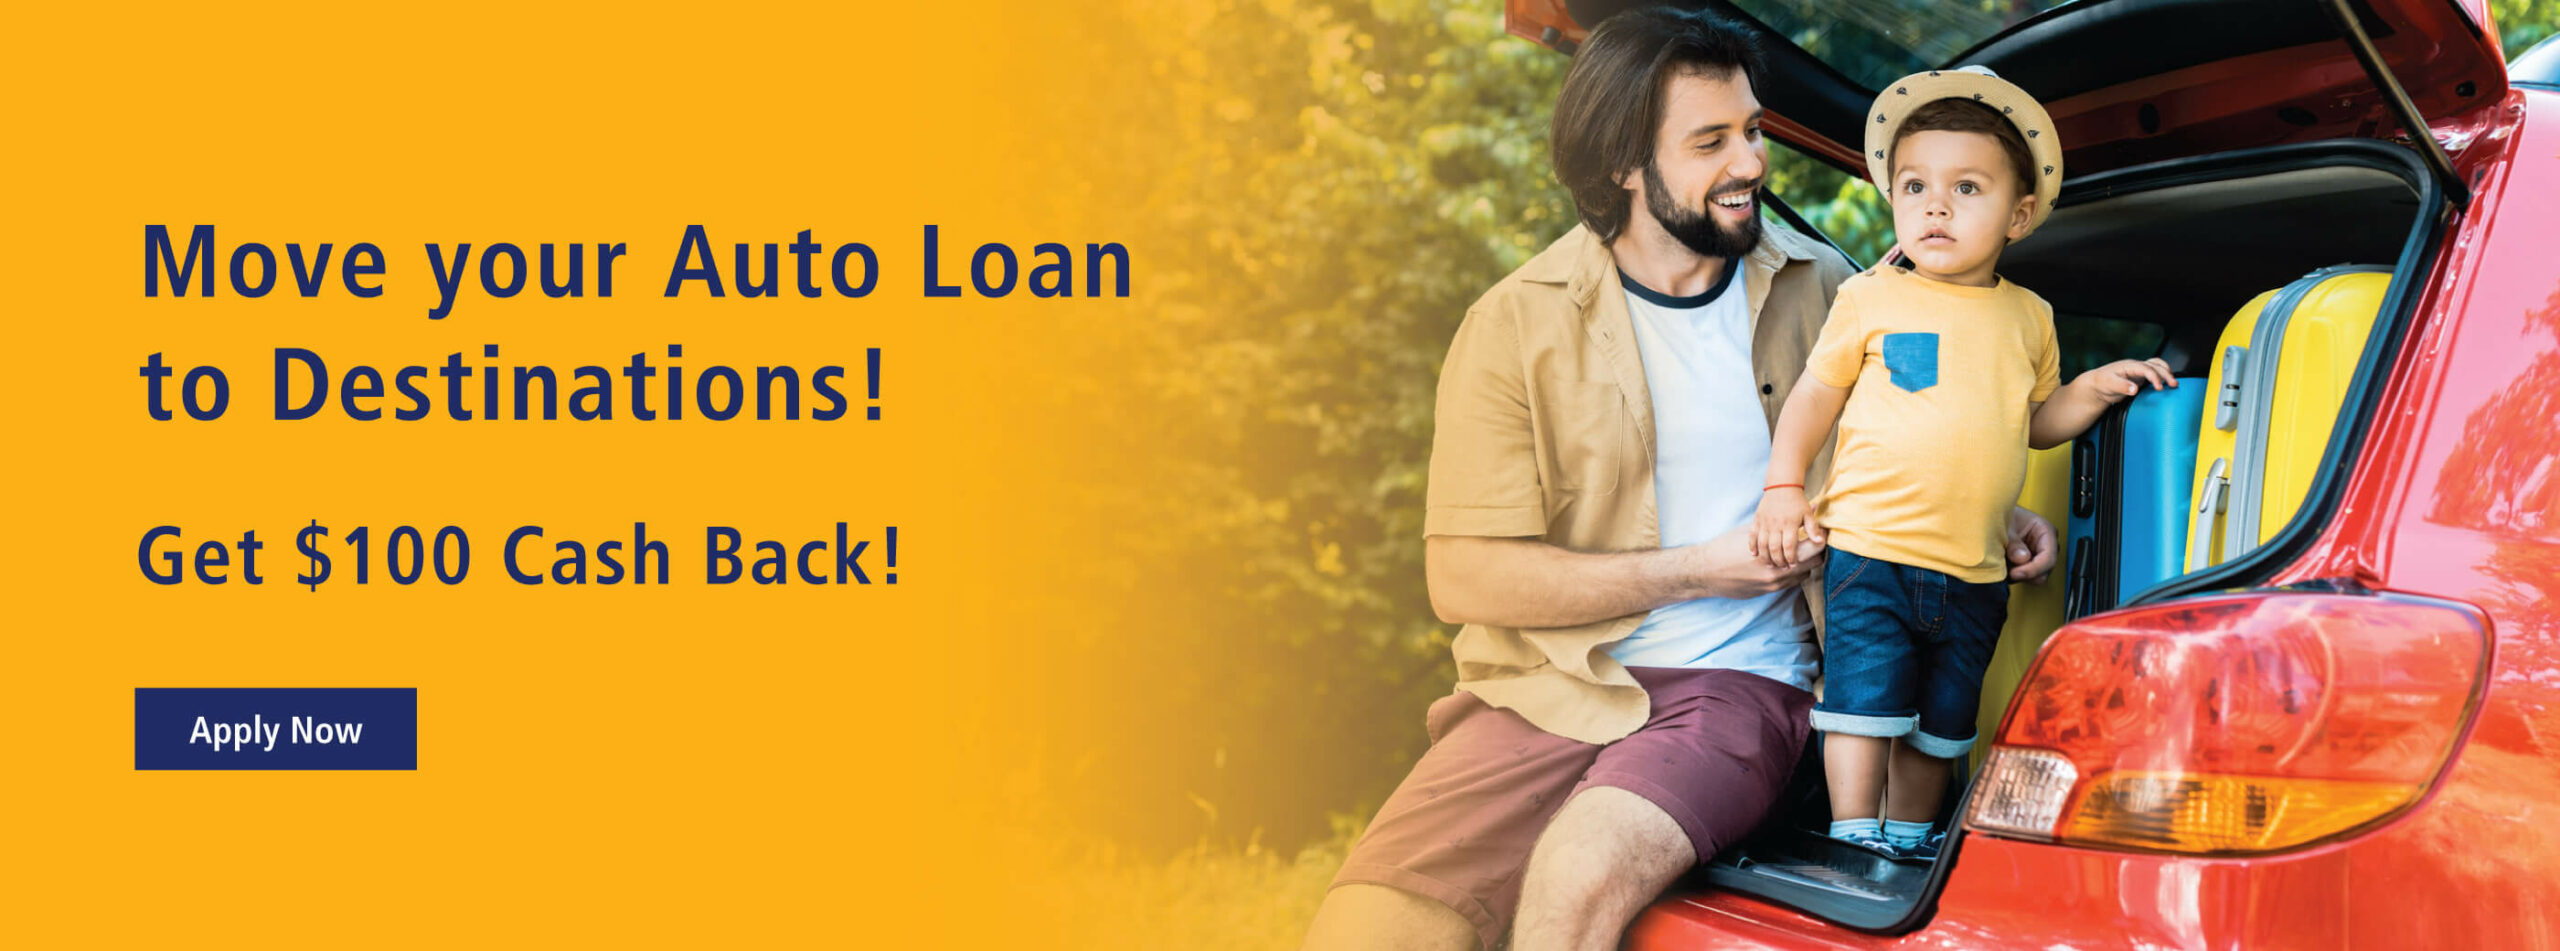 Father and son in bed of truck with text "Move your Auto Loan to Destinations, Get $100 Cash Back"